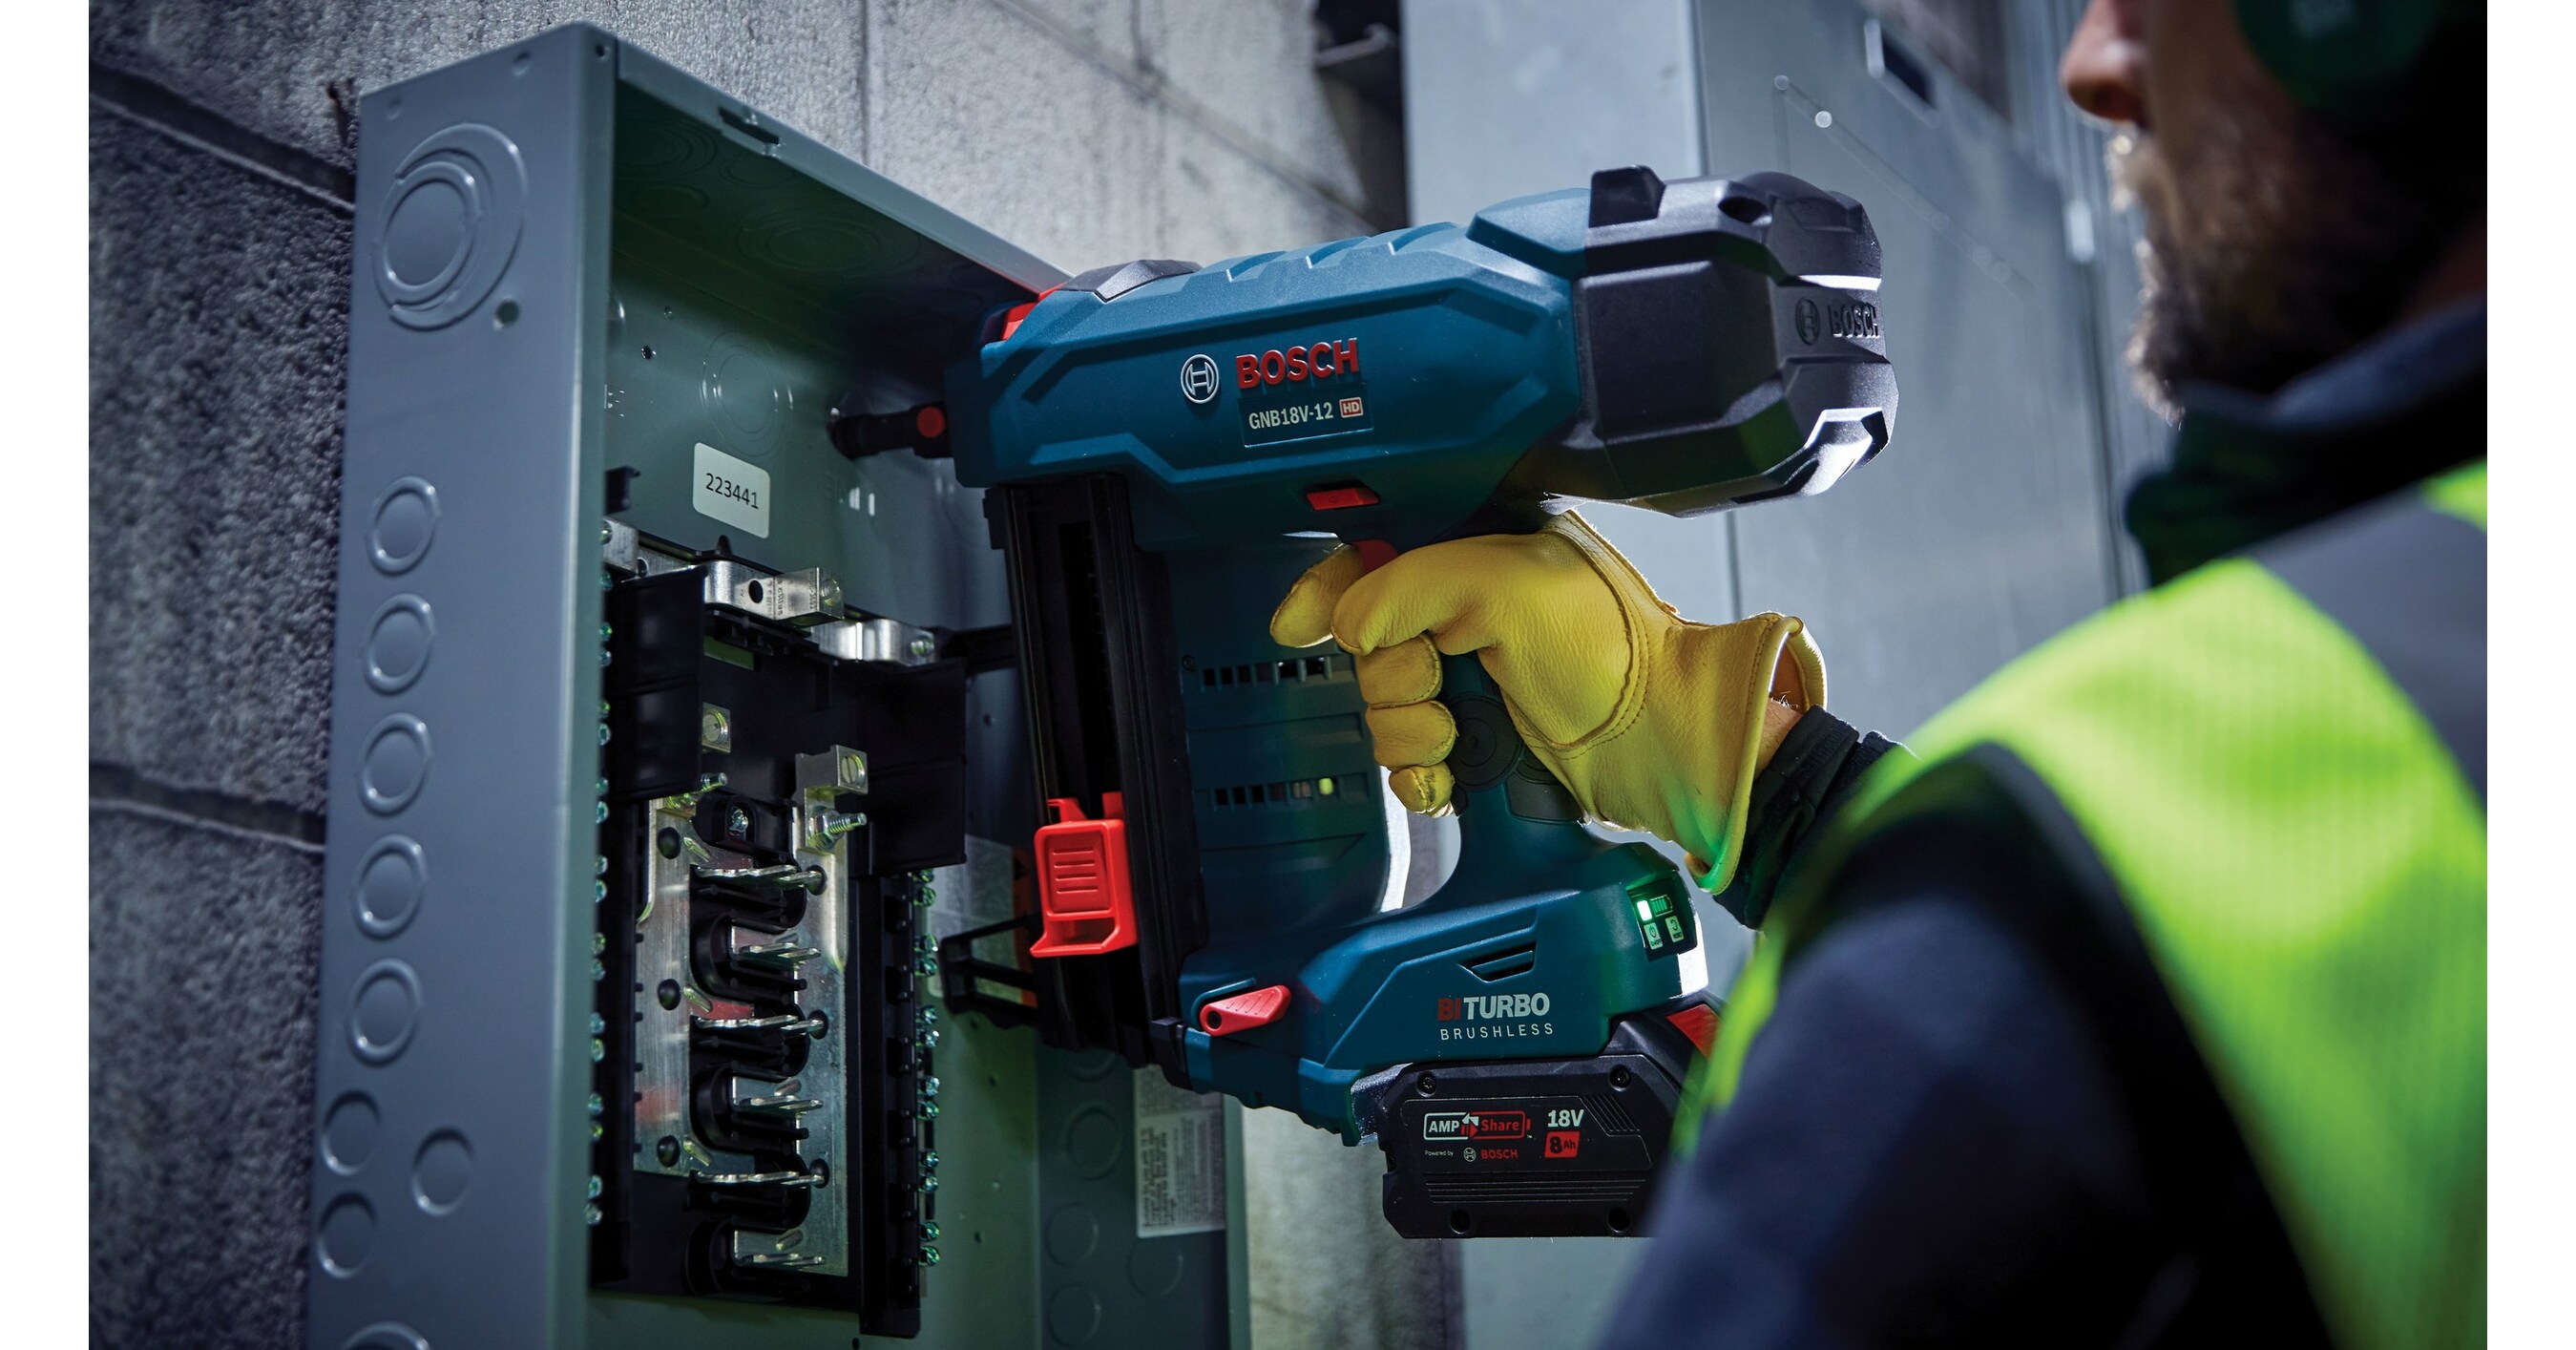 Efficiency boost for professional users: Bosch opens Professional 18V  System for expert brands - Bosch Media Service